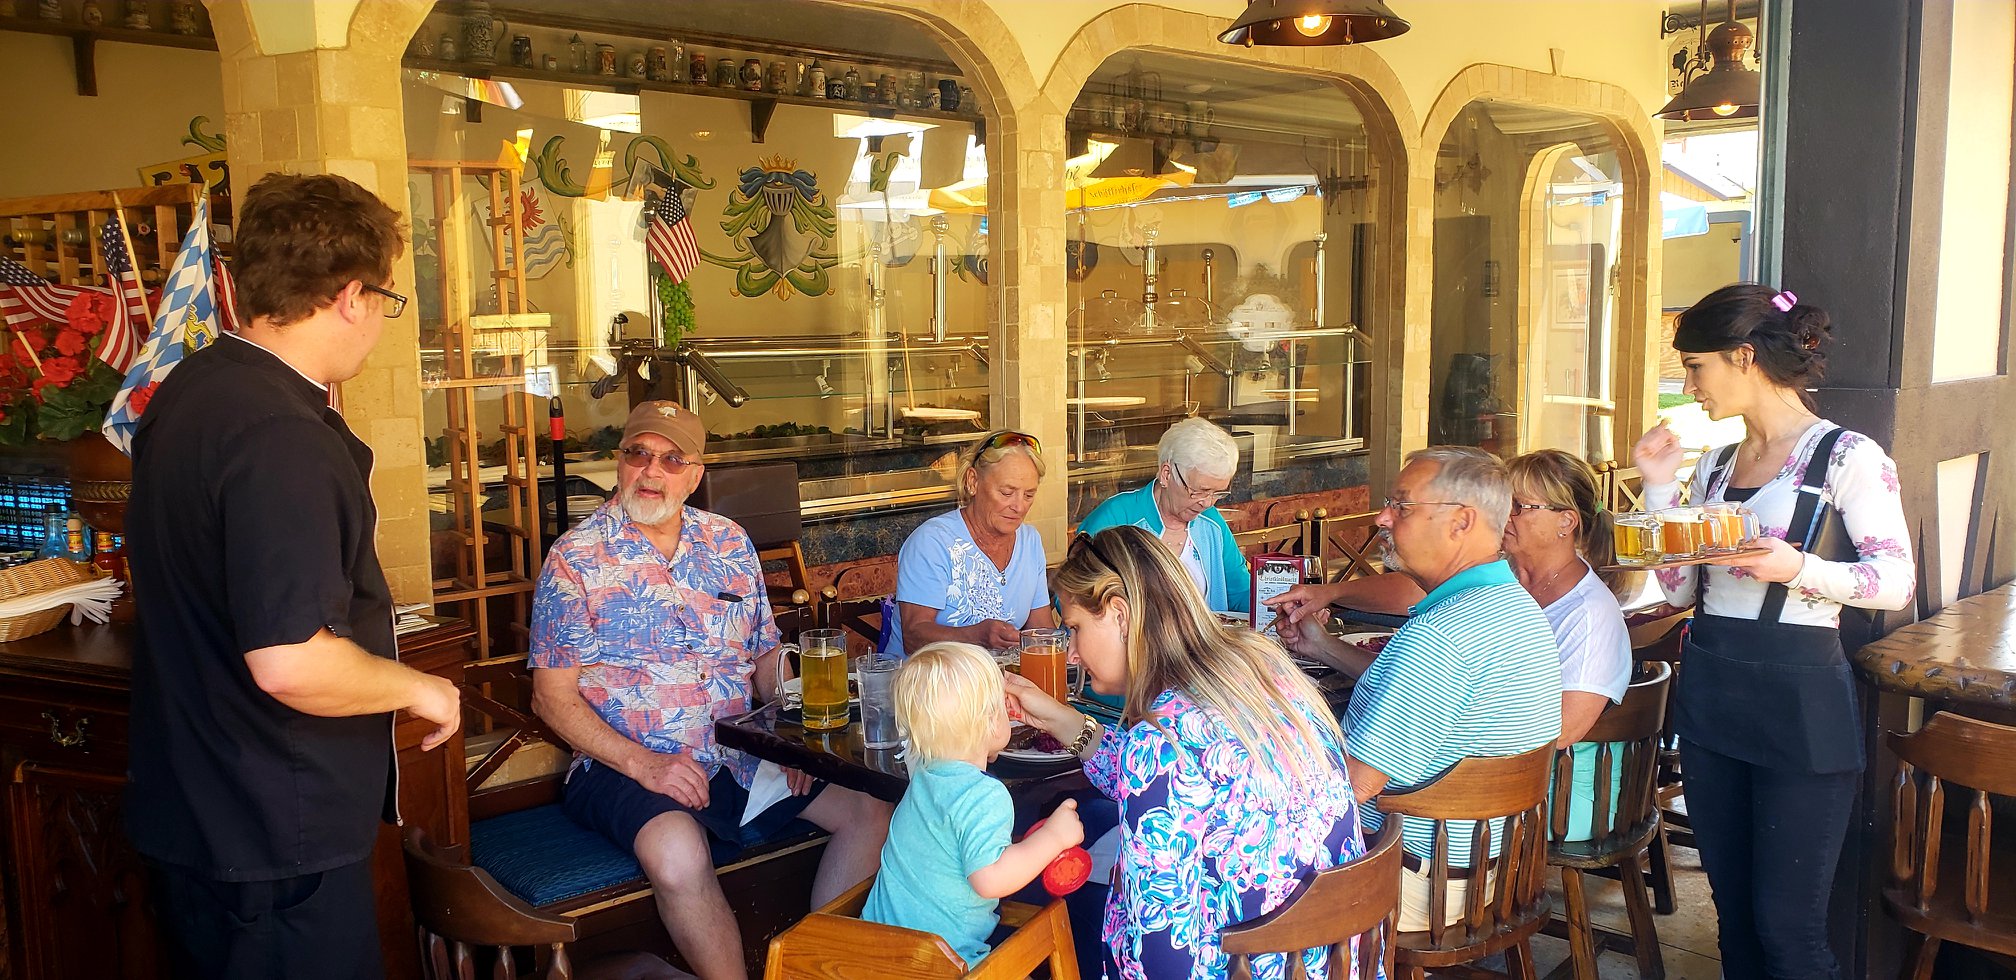 Group of people dining at the Cocoa Village Bier Gartien, The Chef and staff are attending to guests on a Village Food Tour